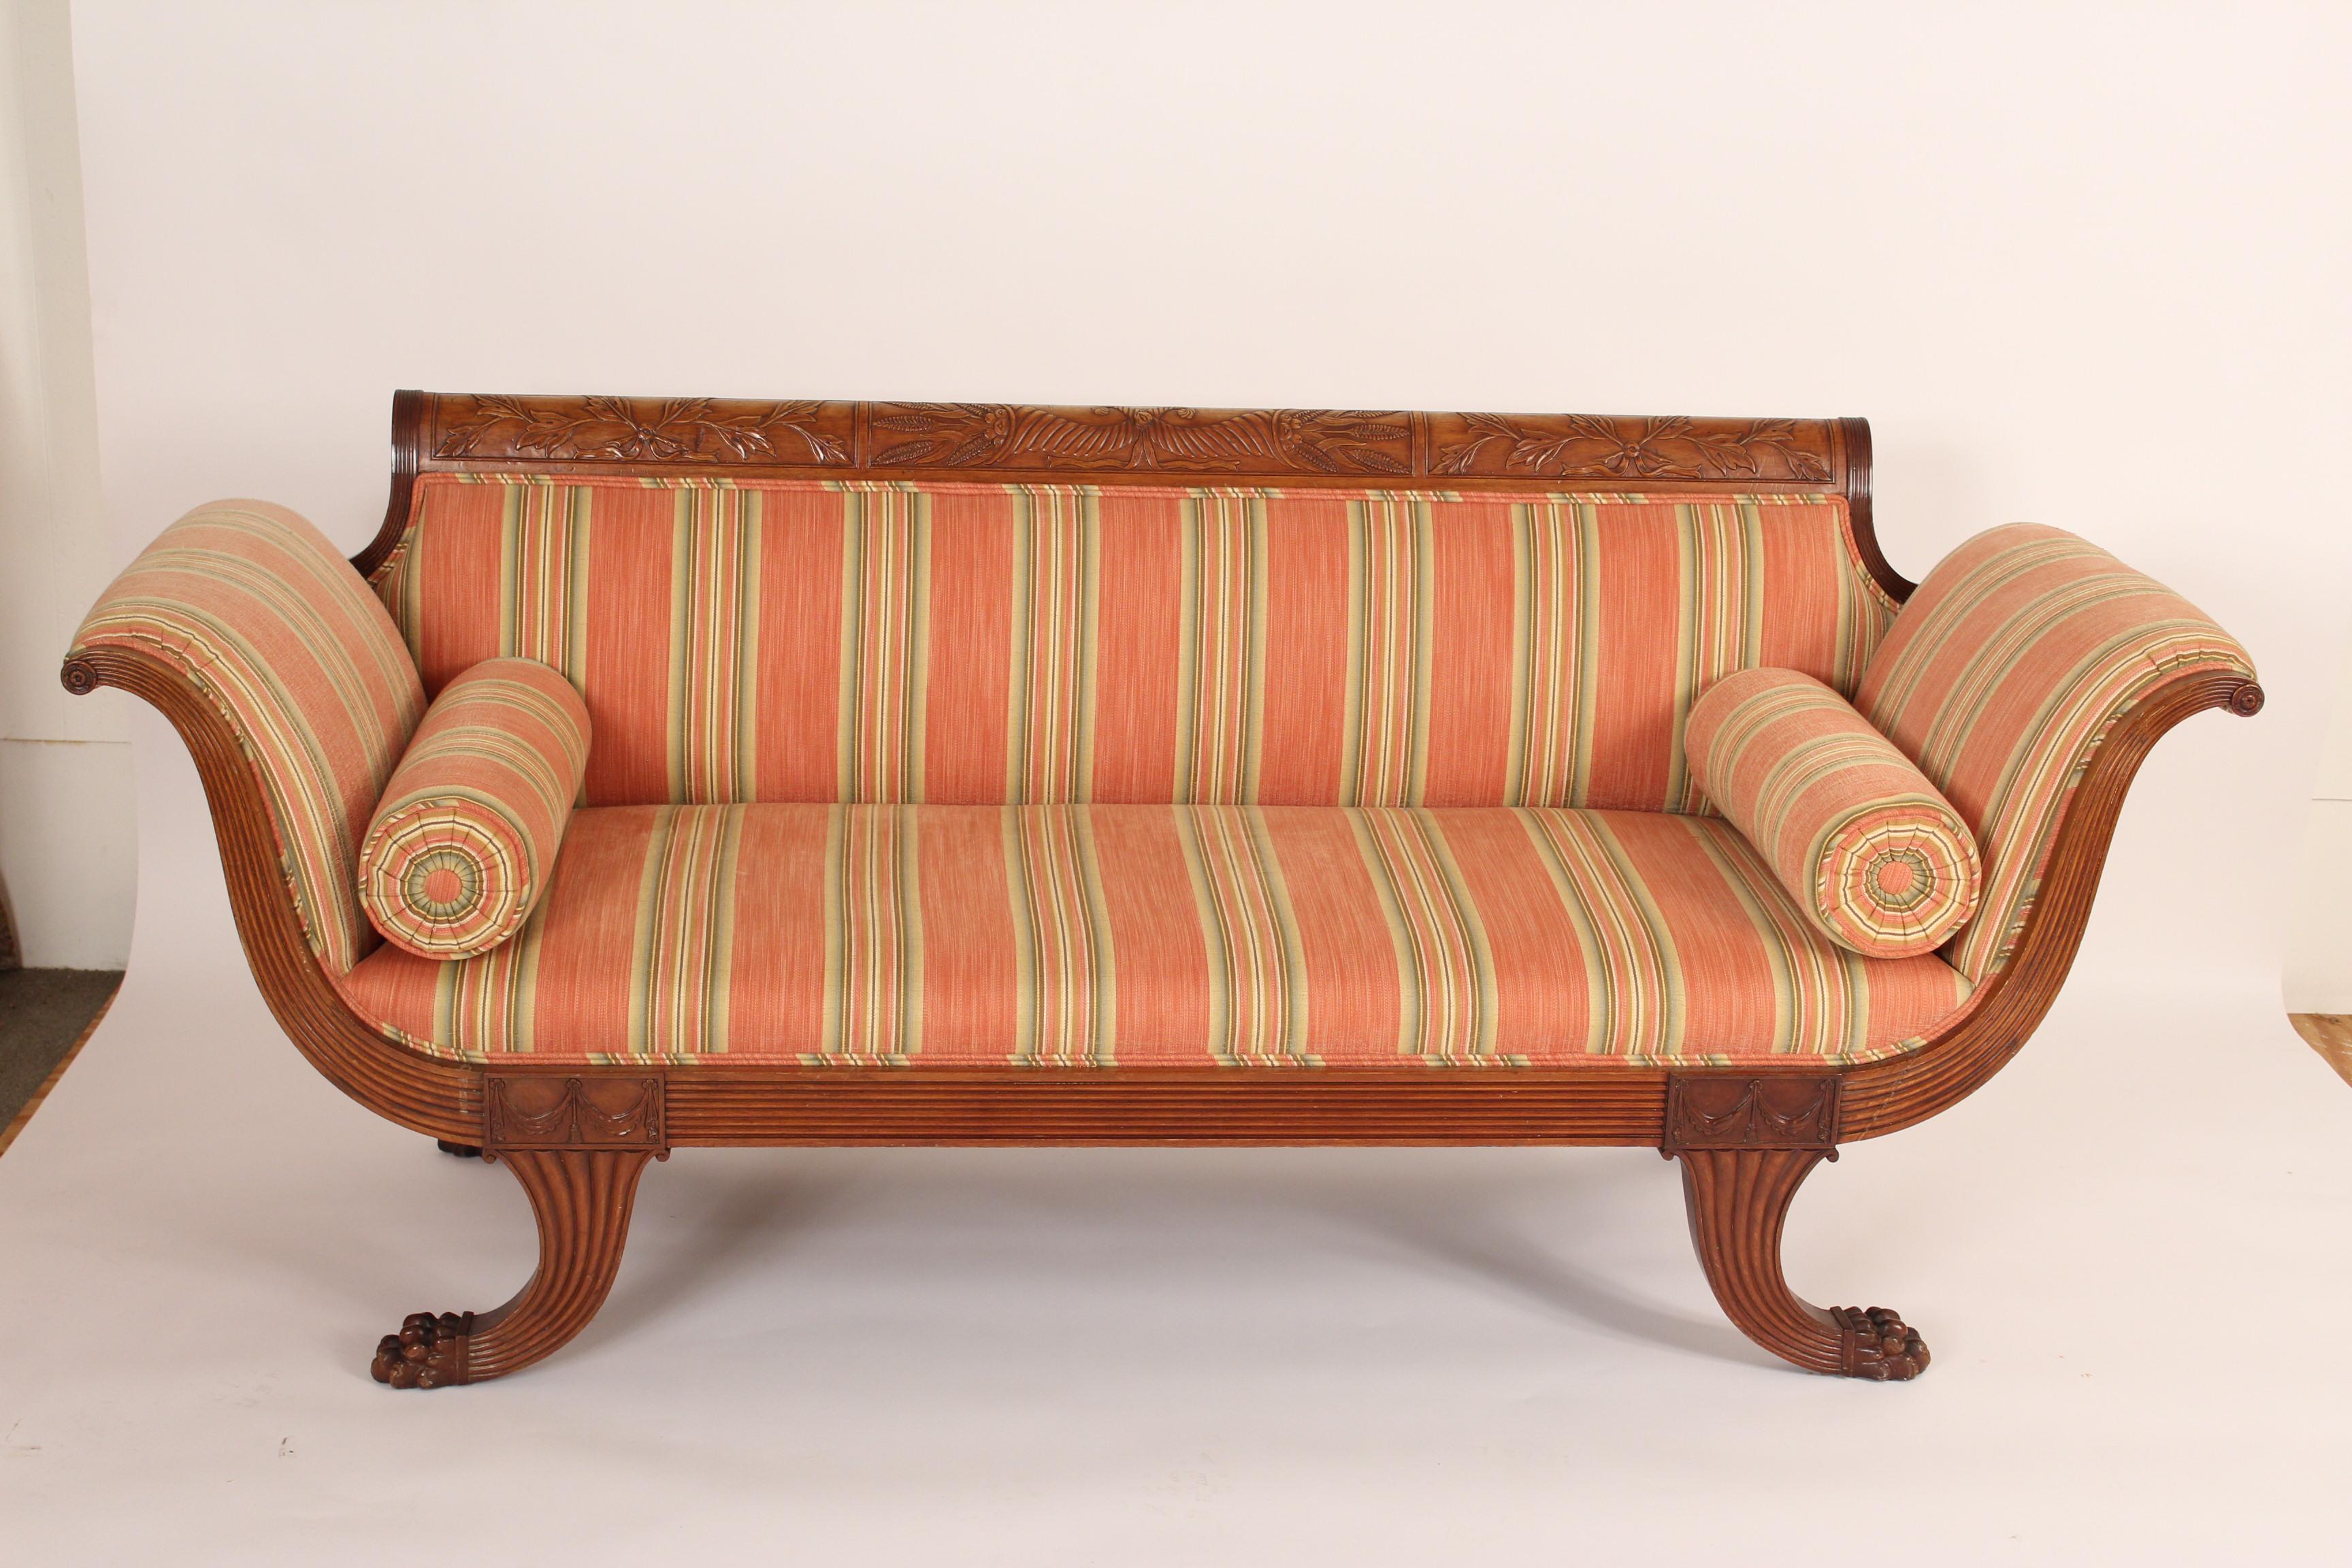 Duncan Phyfe style carved mahogany sofa, circa 1920s. The crest rail having interesting cornucopia and vine carving, apron has swag carvings, and the sofa is resting on unusual carved paw feet. Nice older patina. The upholstery is in excellent